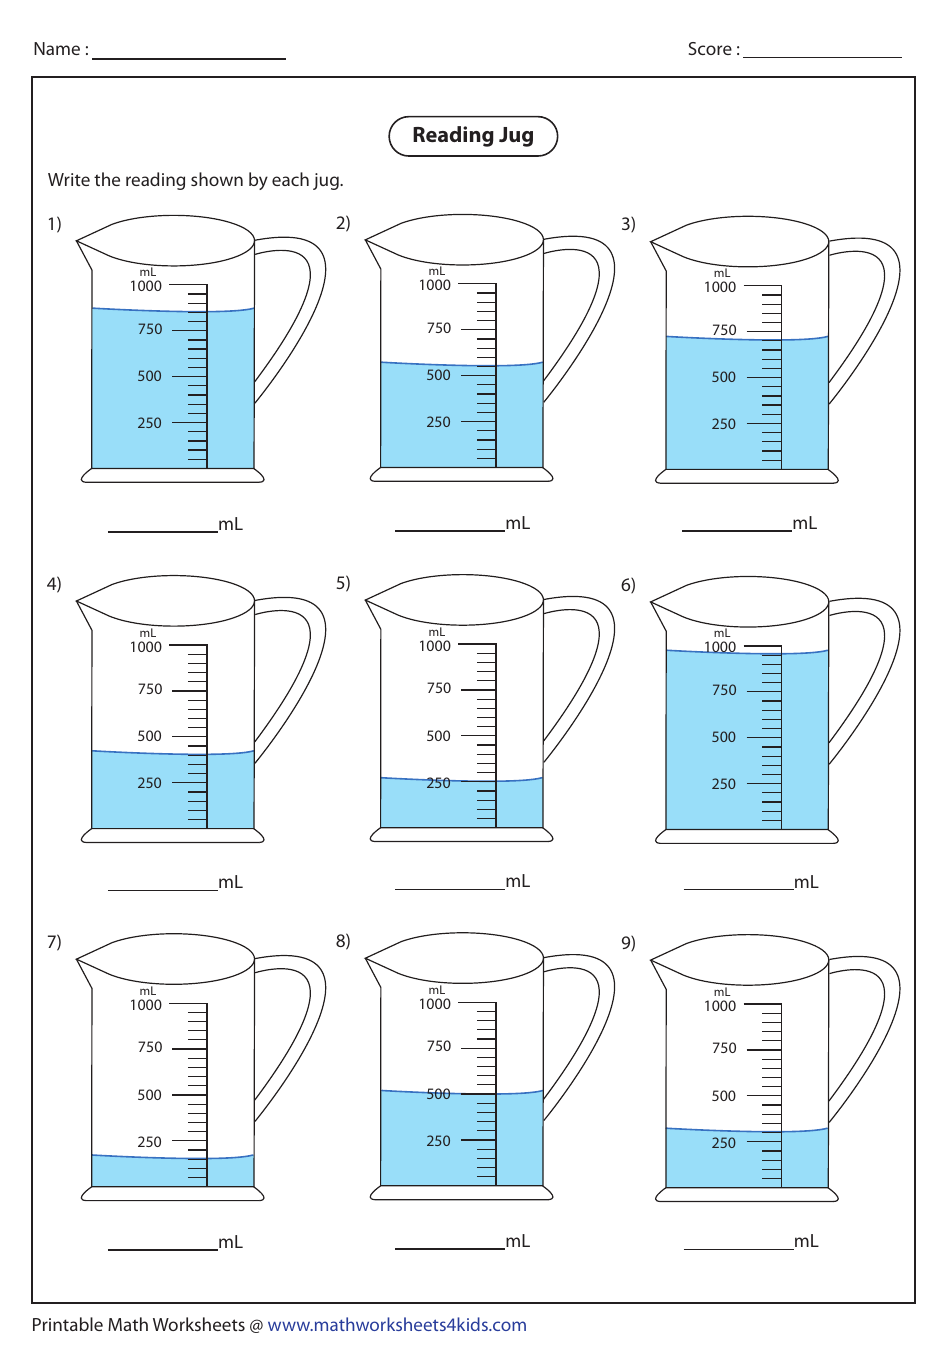 Preview of 'Reading Jug Worksheet' with Answer Key